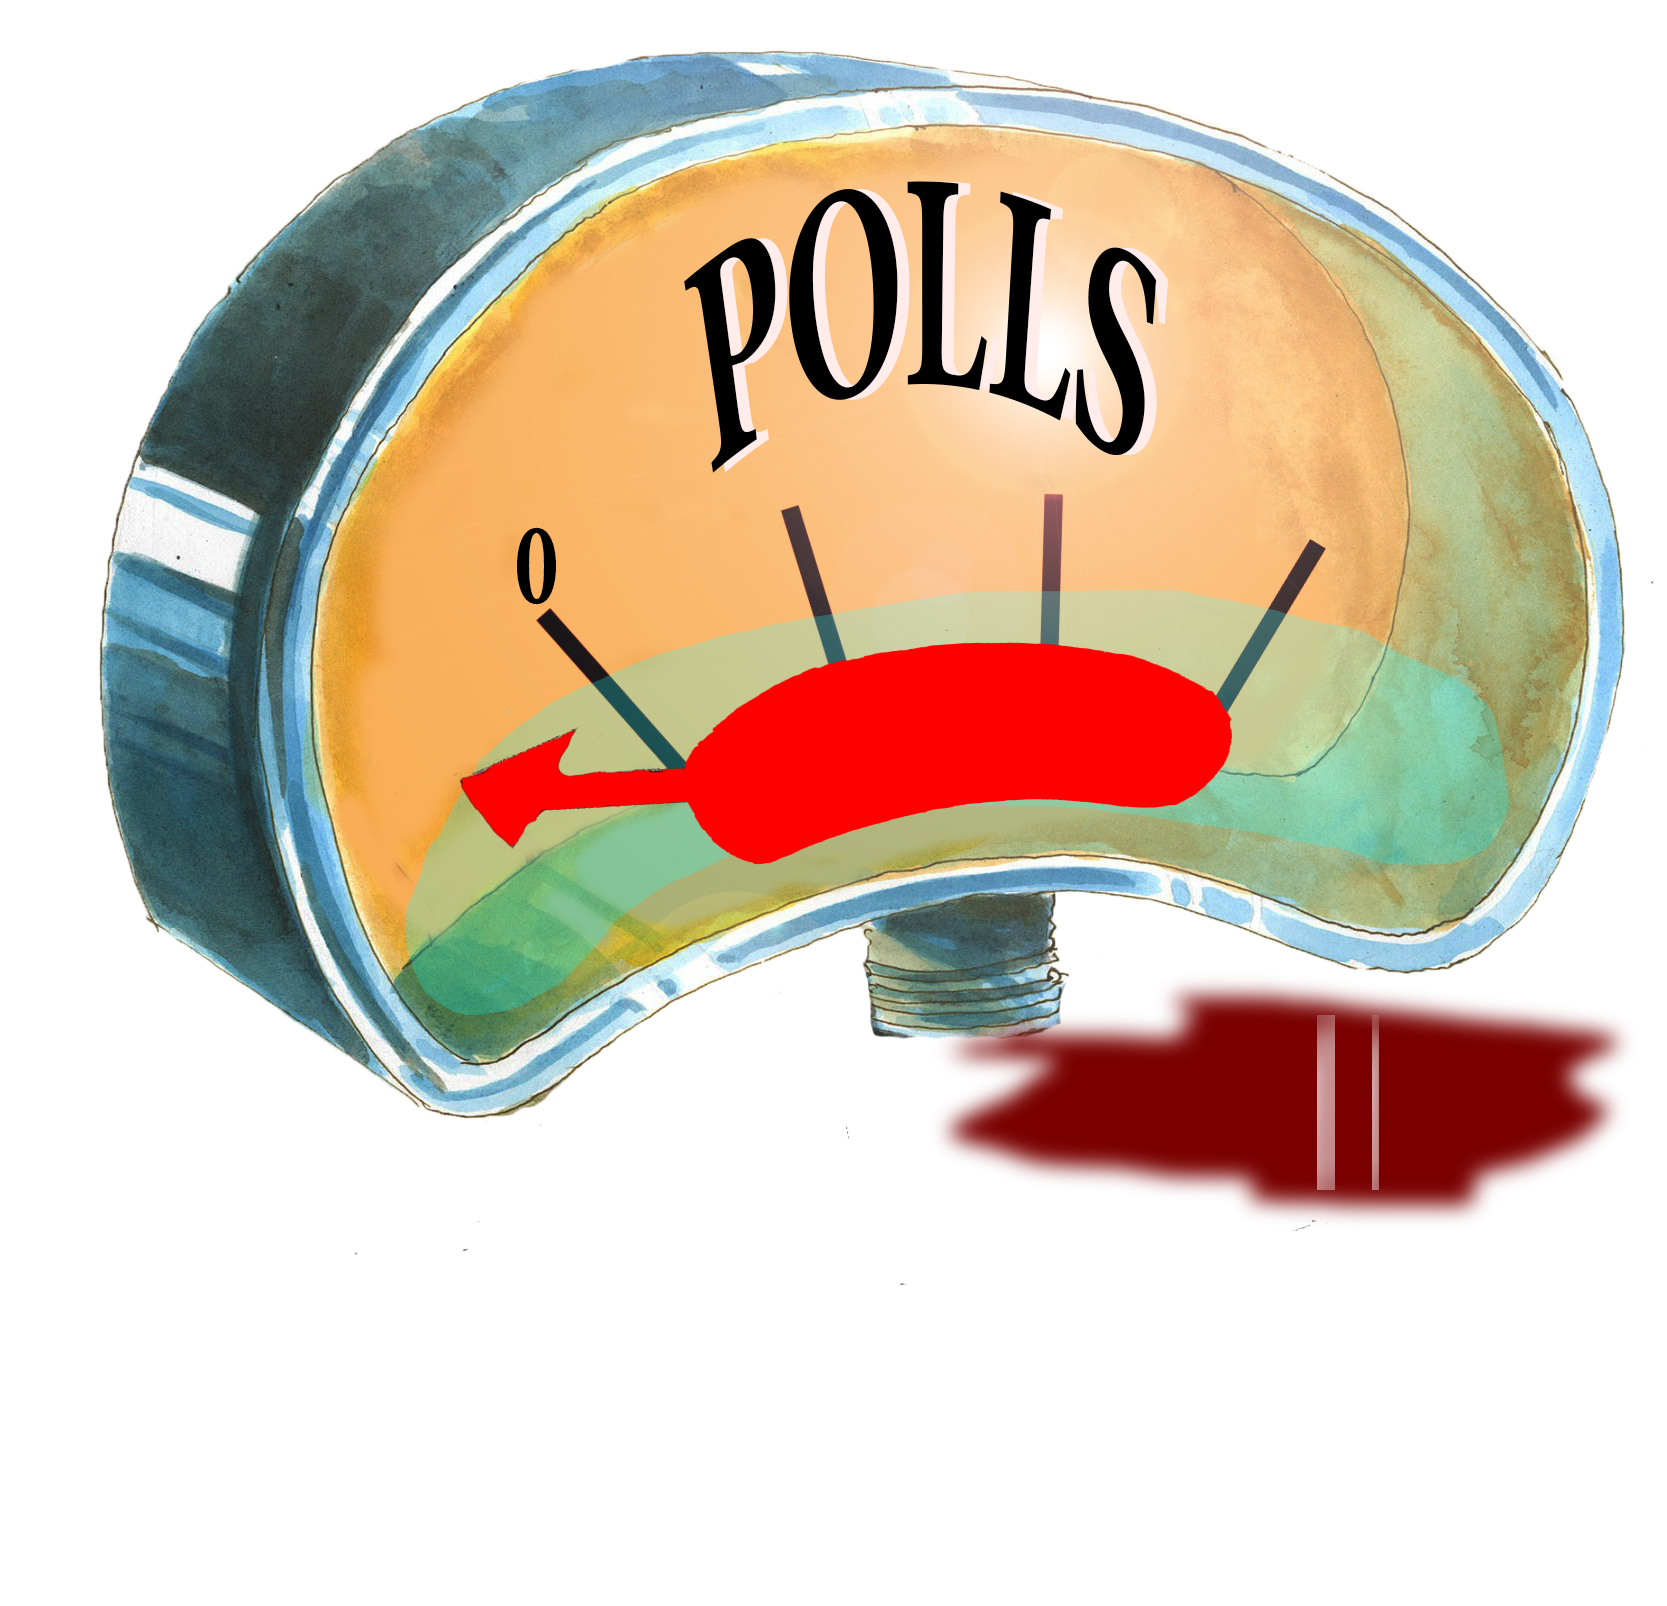 Oped: polling is destroying Western Democracies